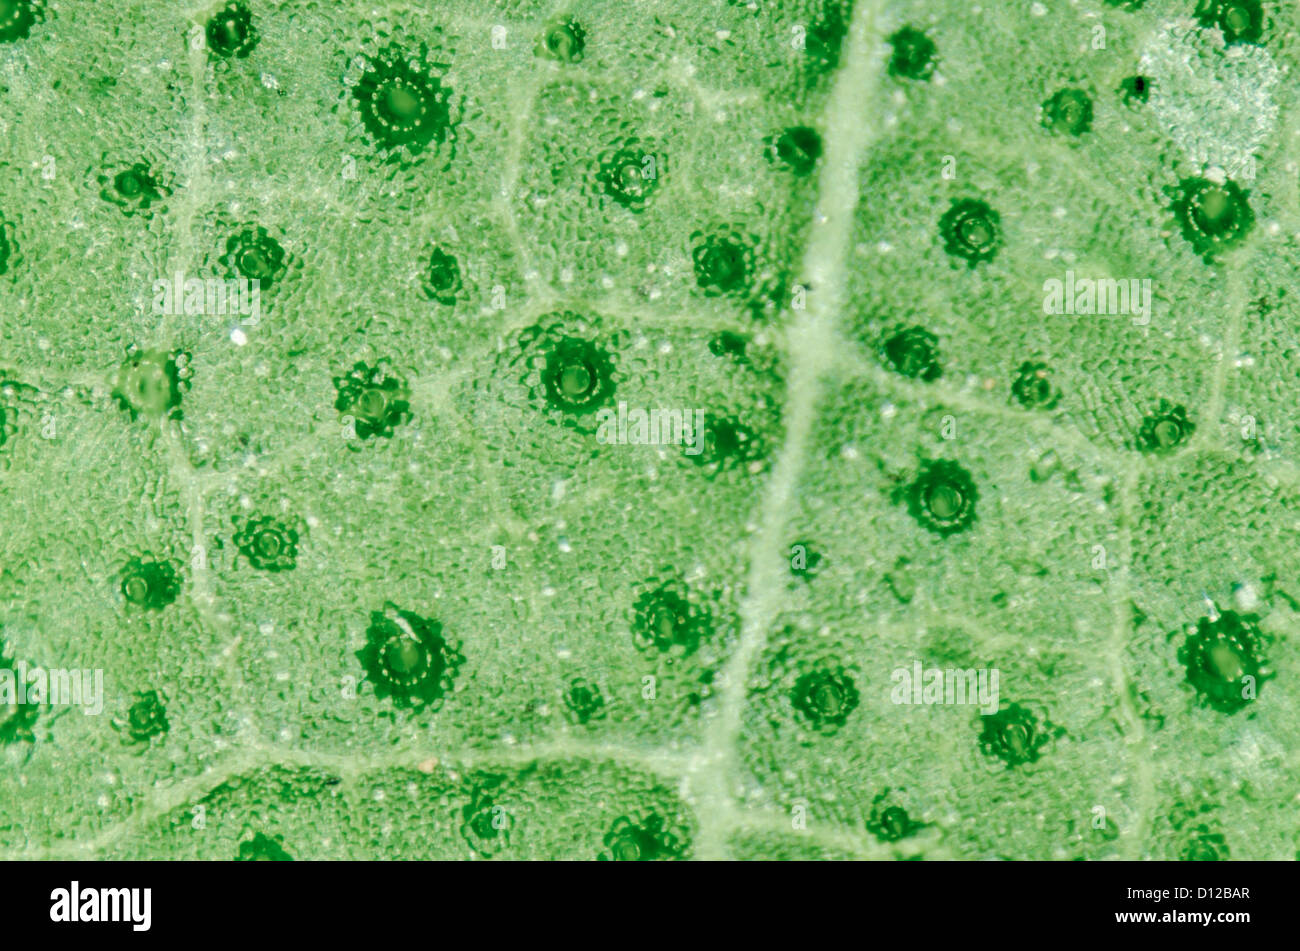 micrograph of green leaf with breathing cells stomata Stock Photo